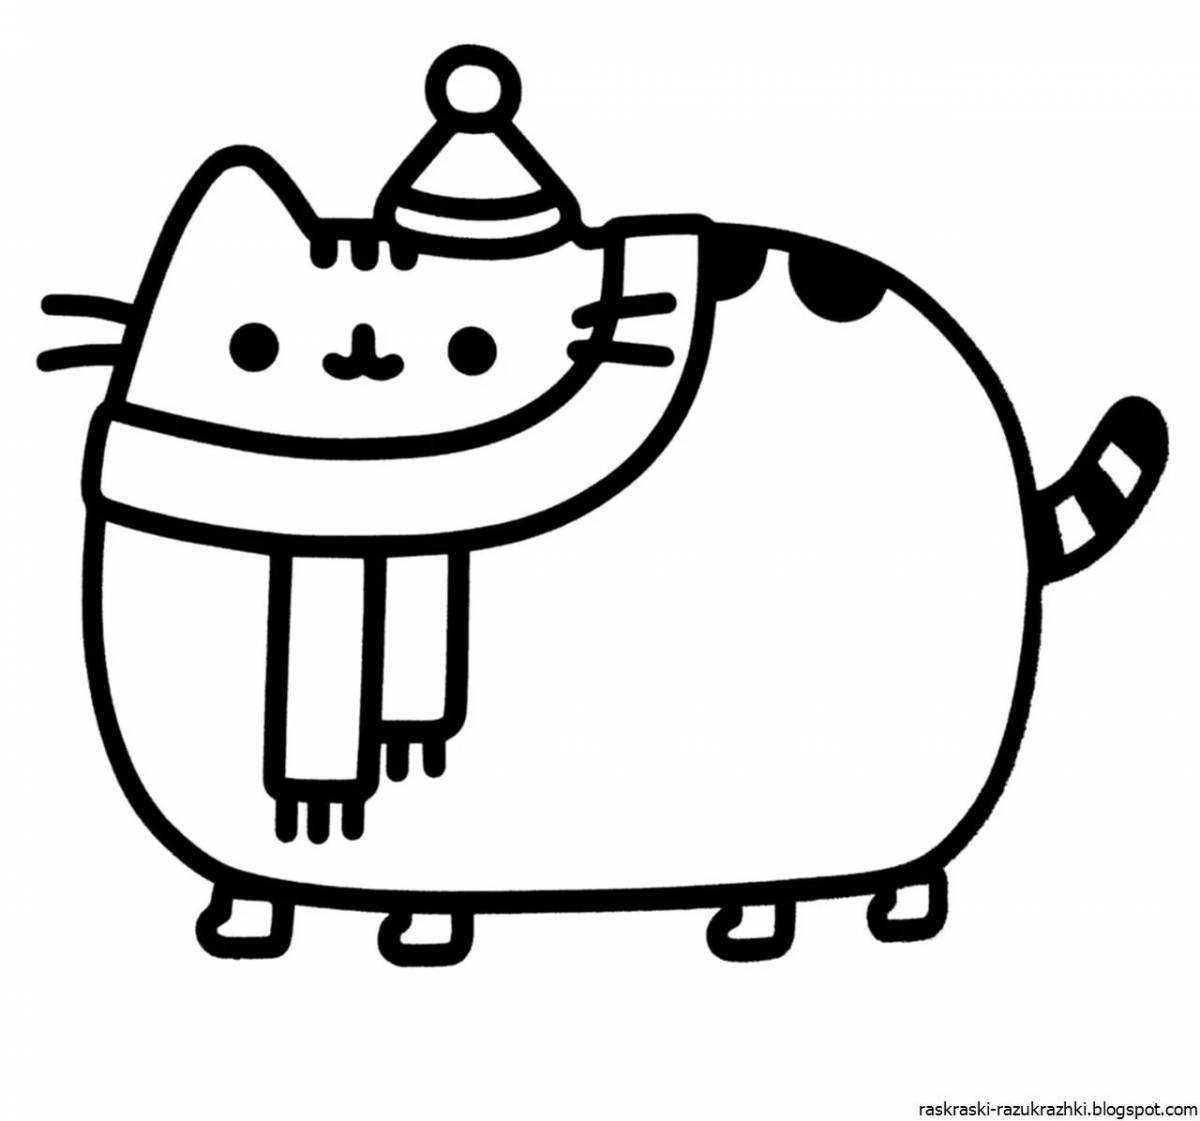 Colourful sushi cat coloring page